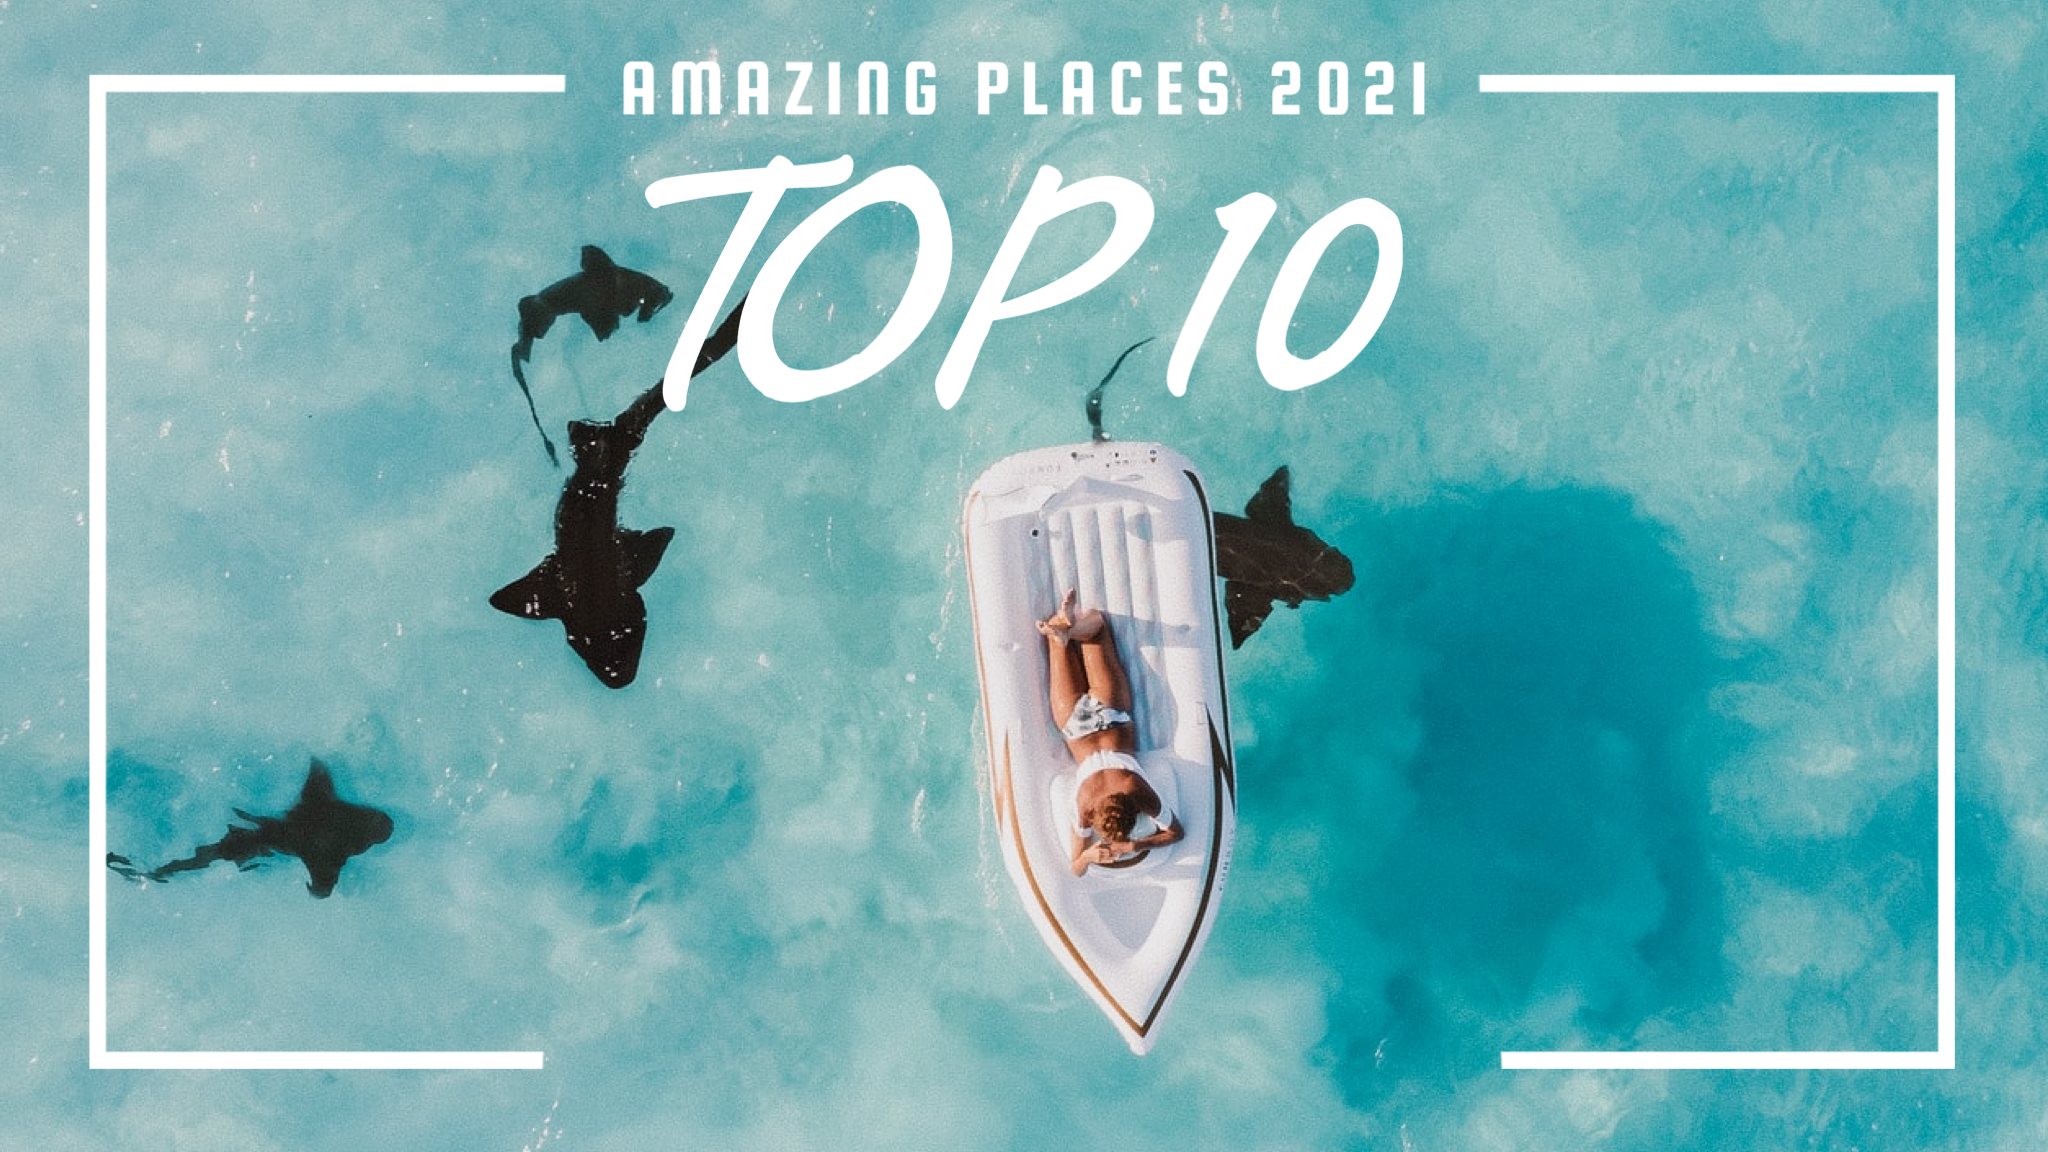 Trip guide top amazing places live stream thumbnail templates